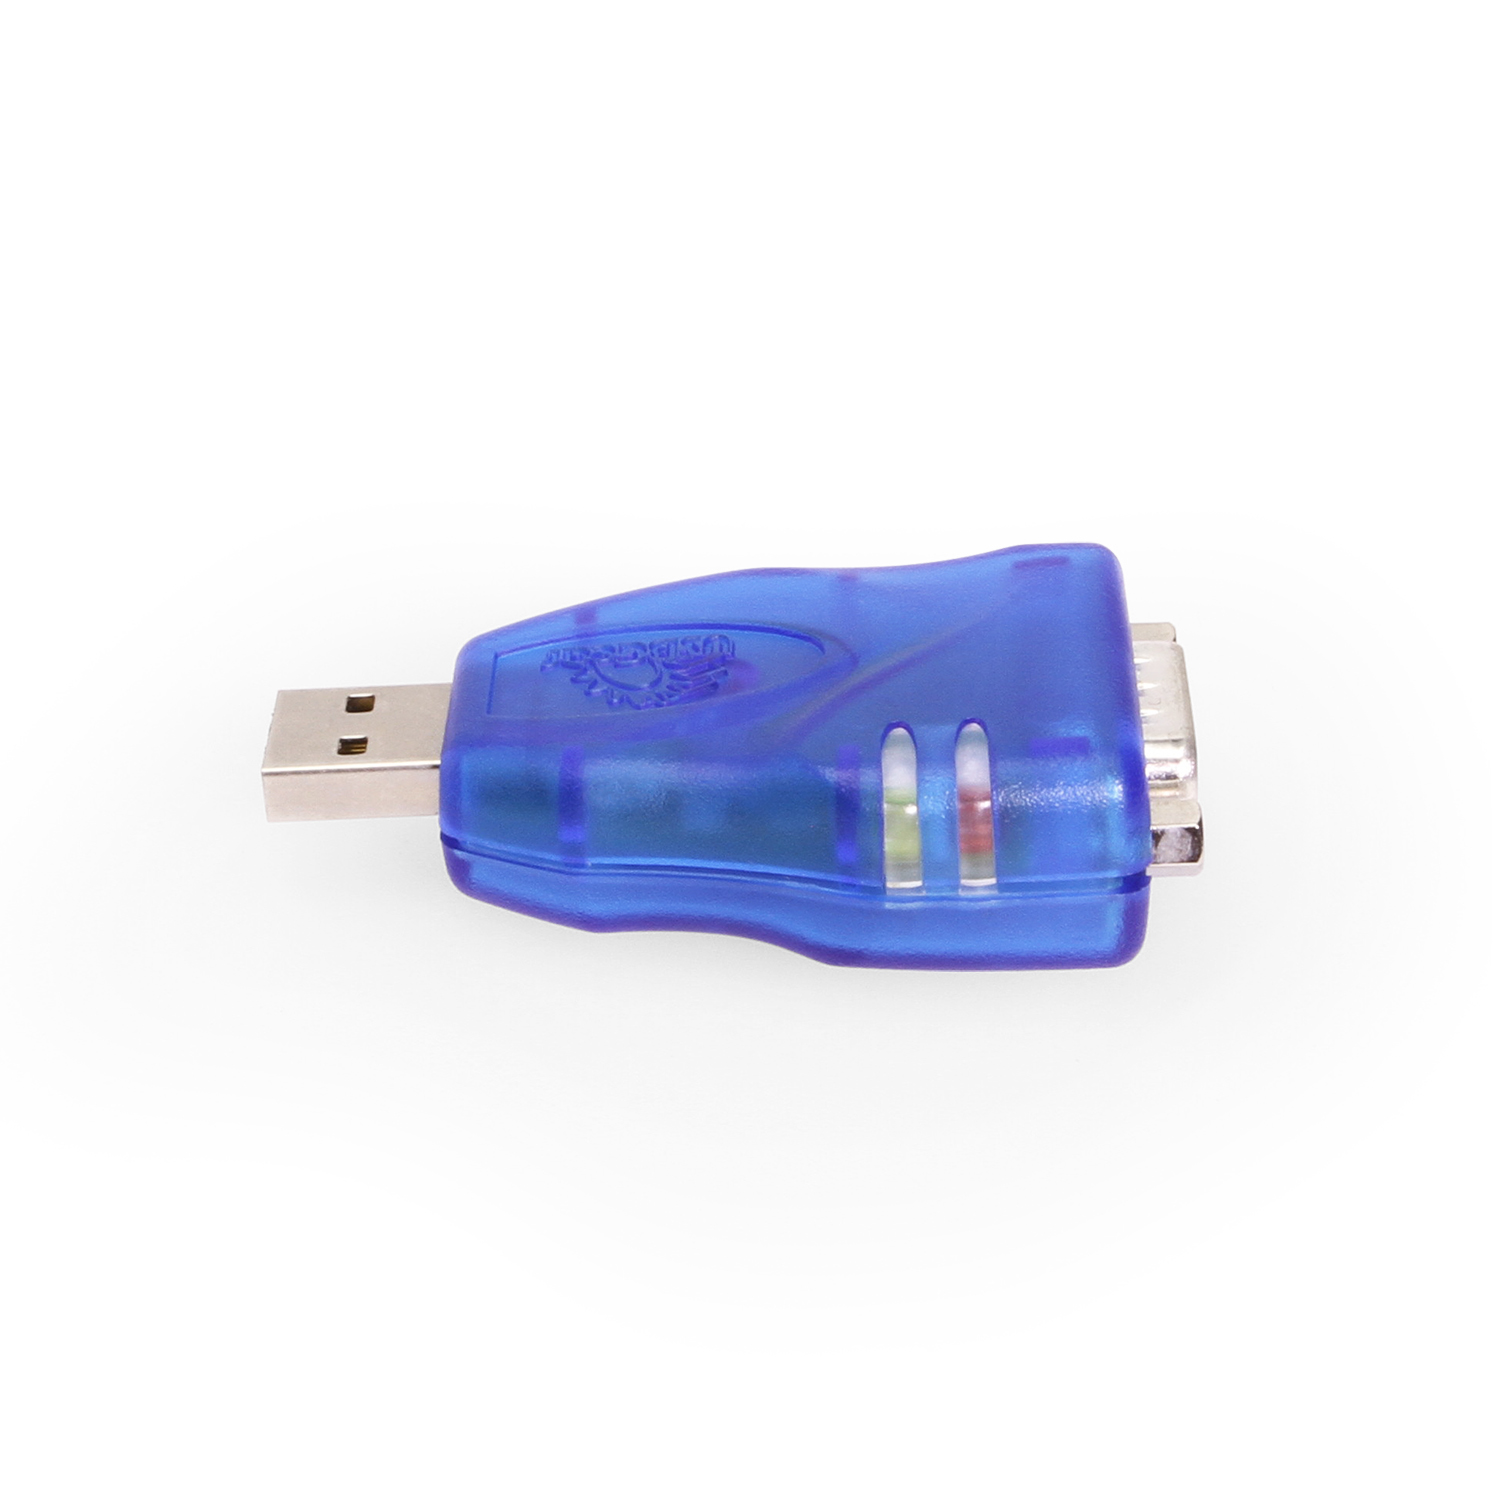 Customized PL2303RA USB RS232 to MD Serial Adapter Cable with Mini